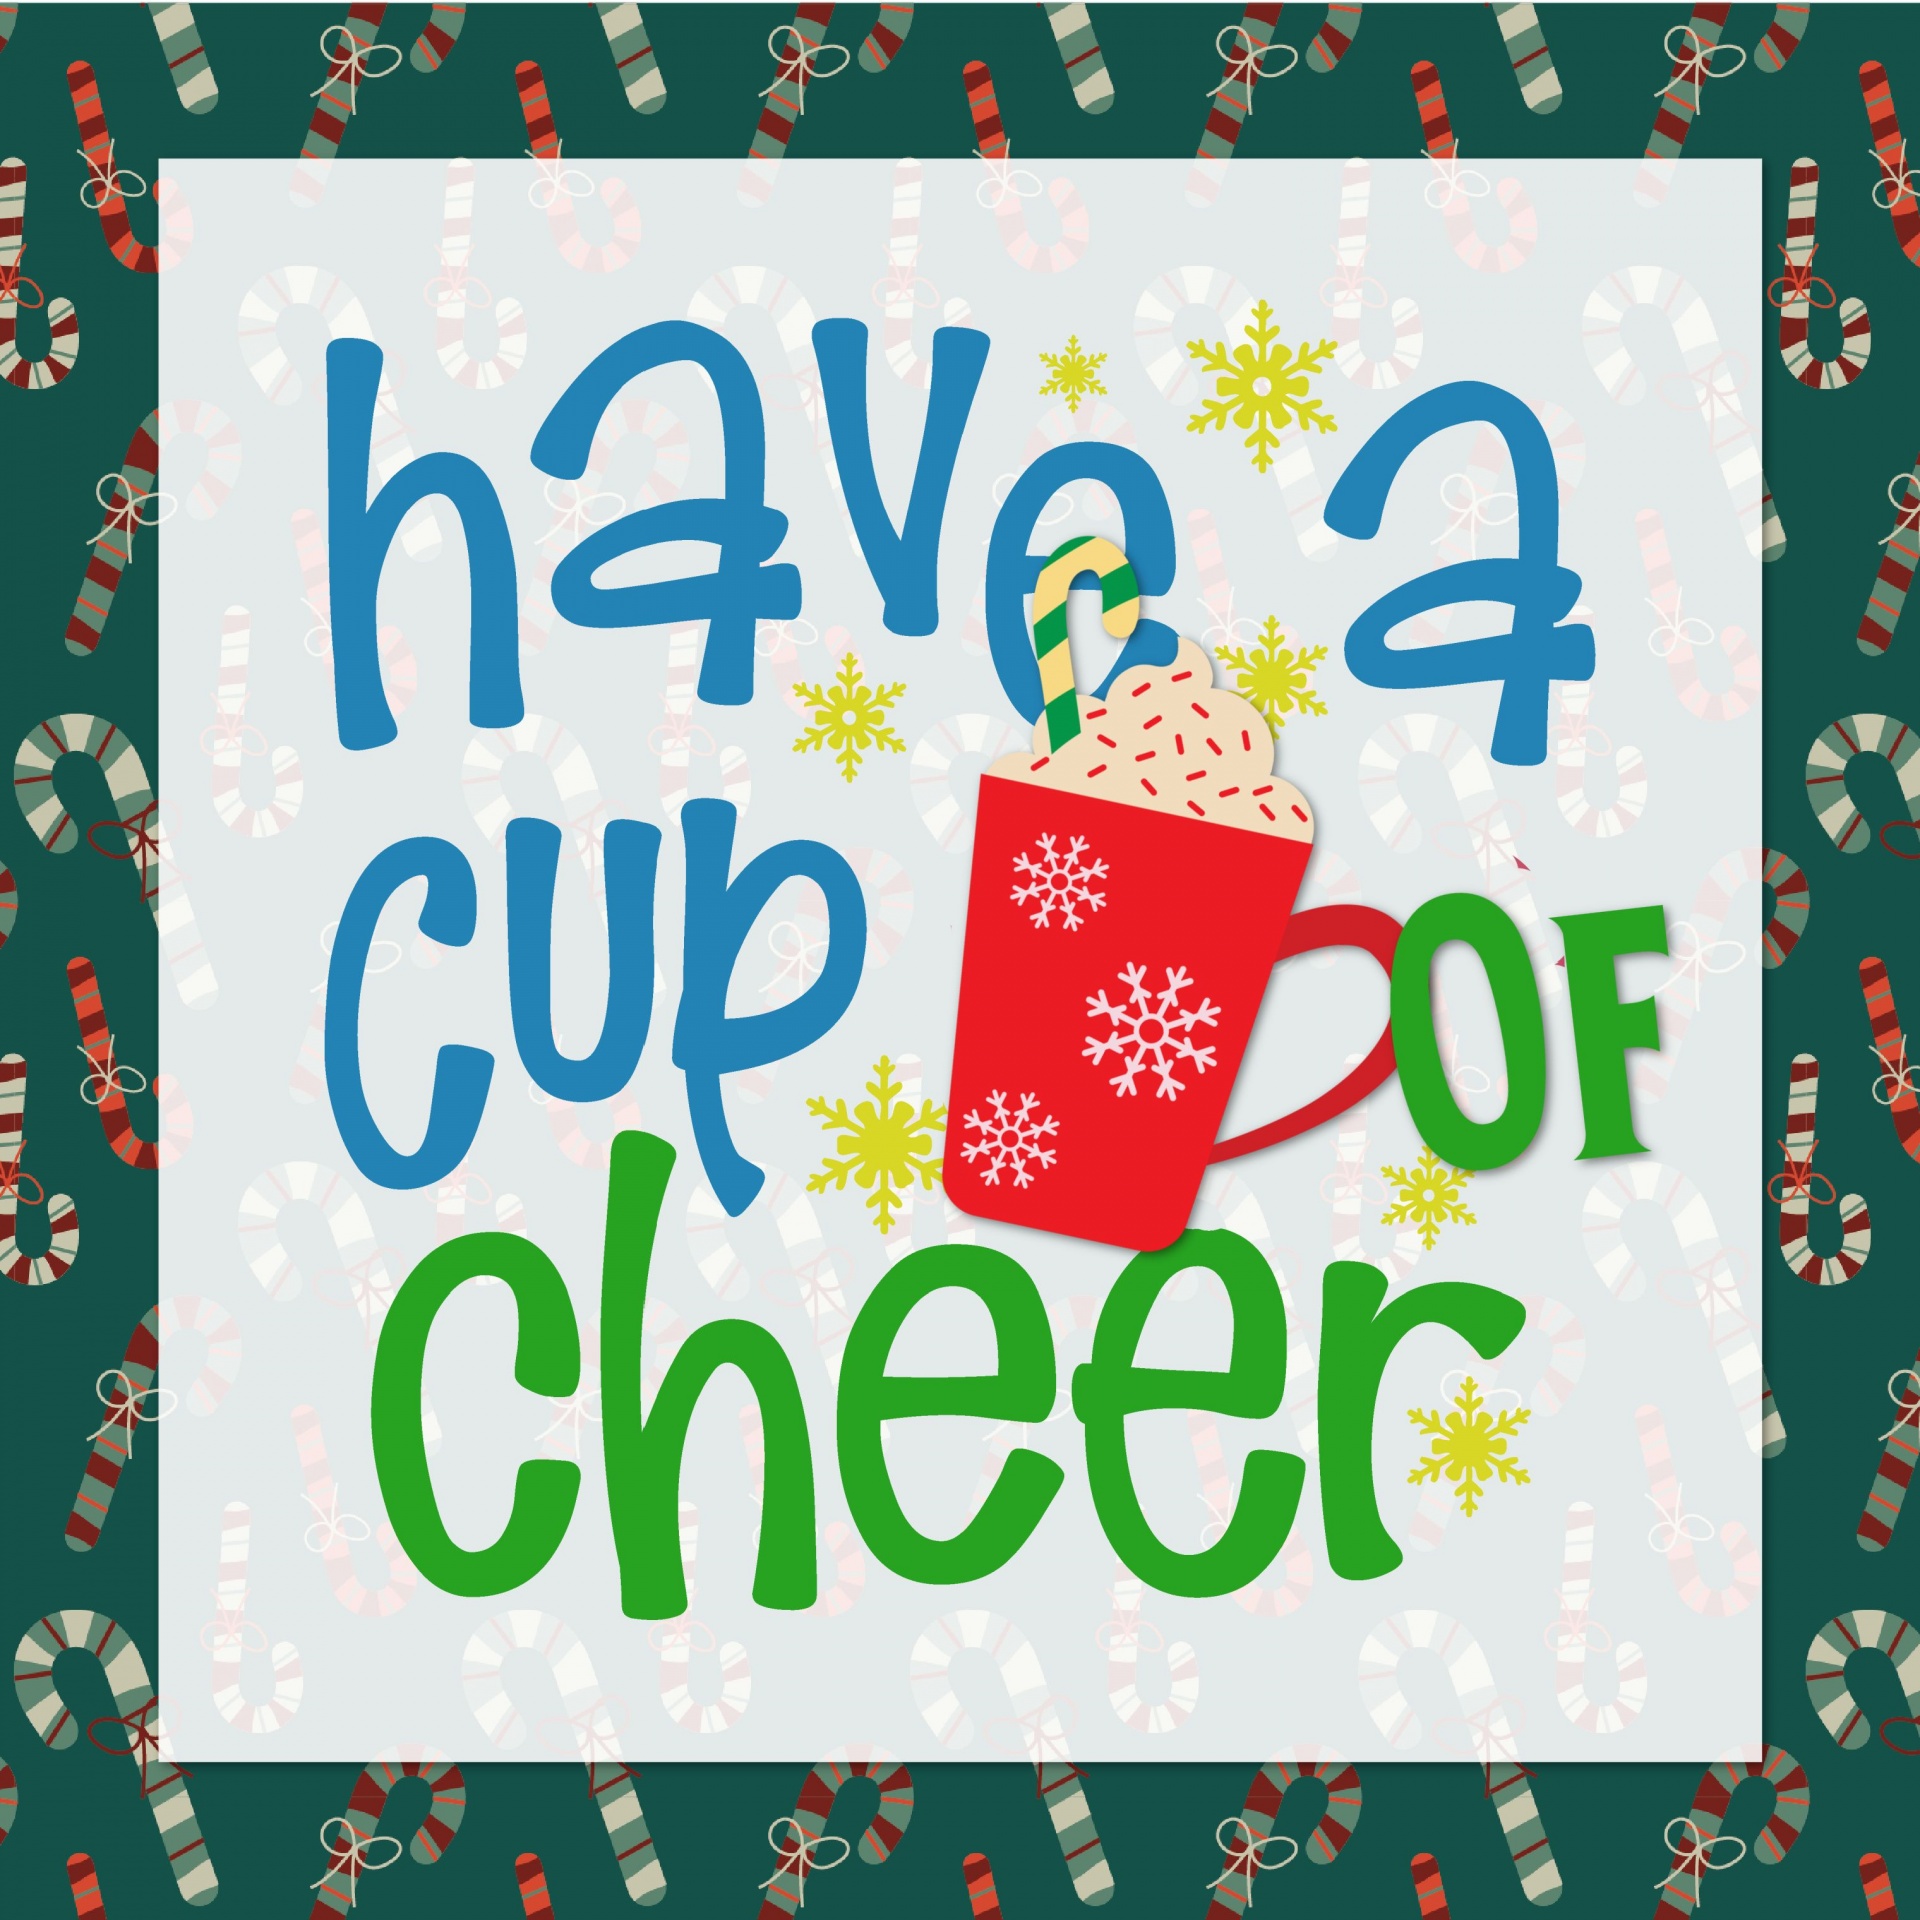 cup-of-cheer-free-stock-photo-public-domain-pictures